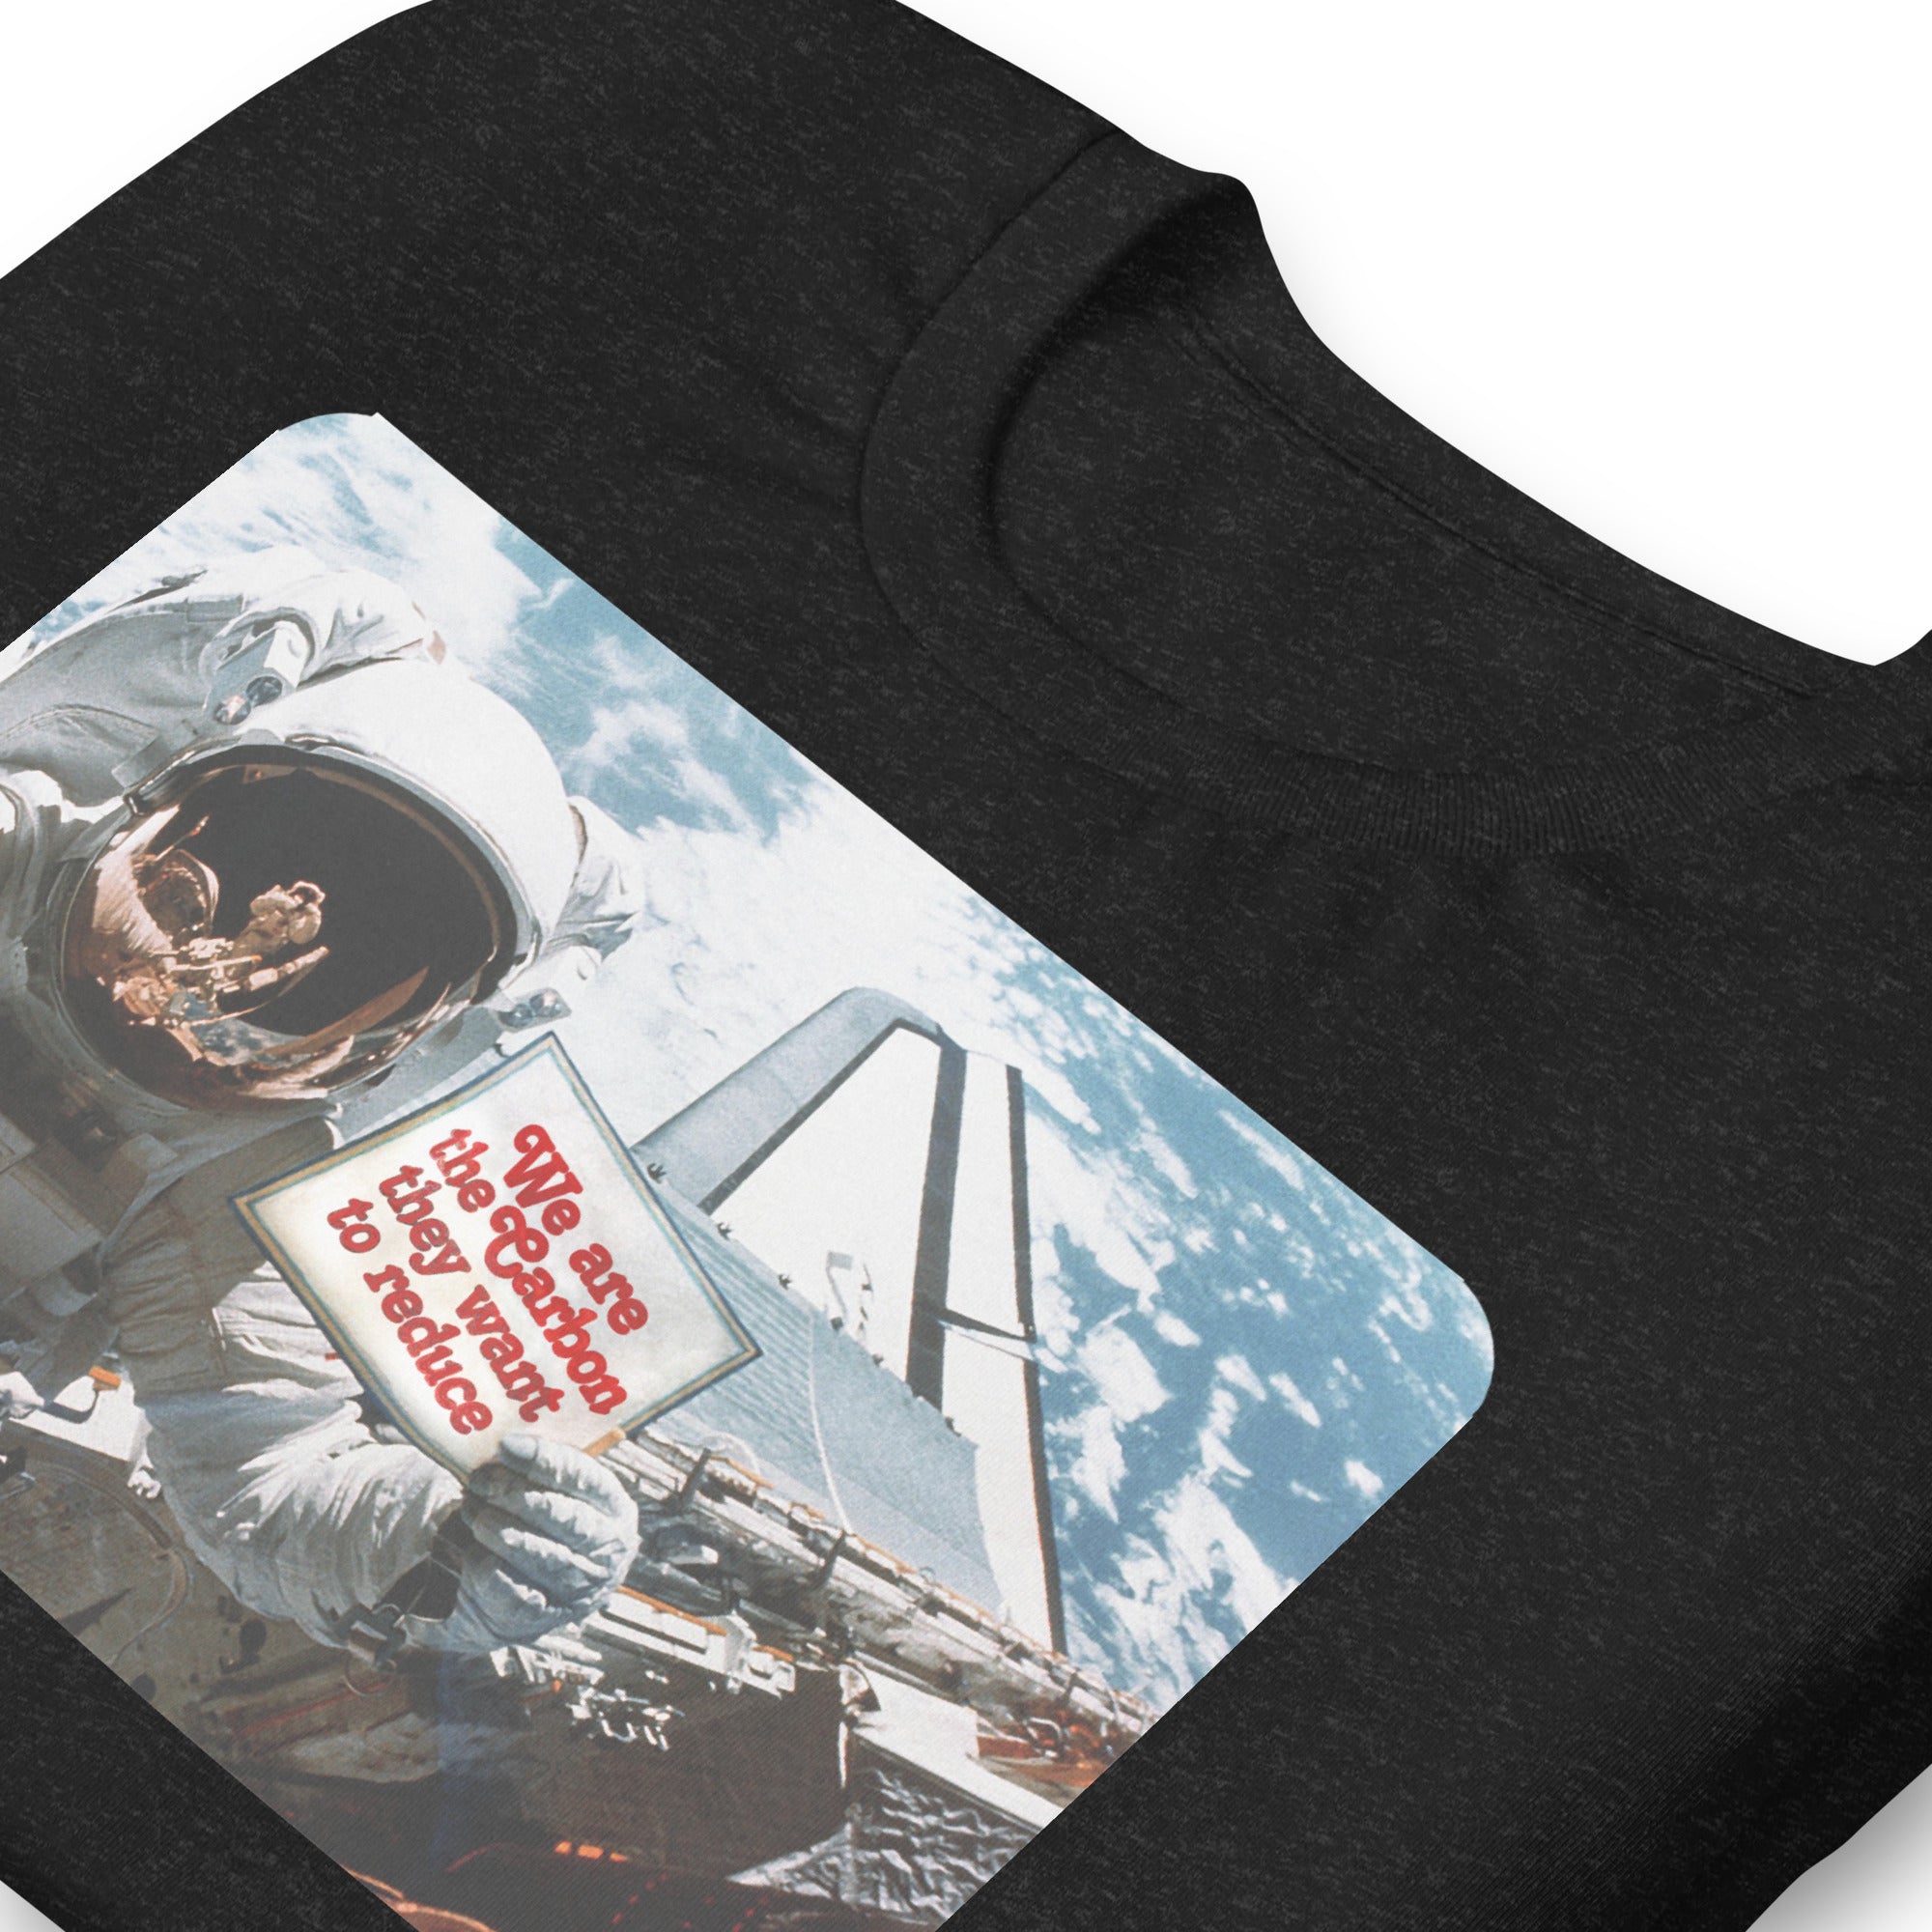 We Are the Carbon They Want To Reduce Spacewalk T-Shirt